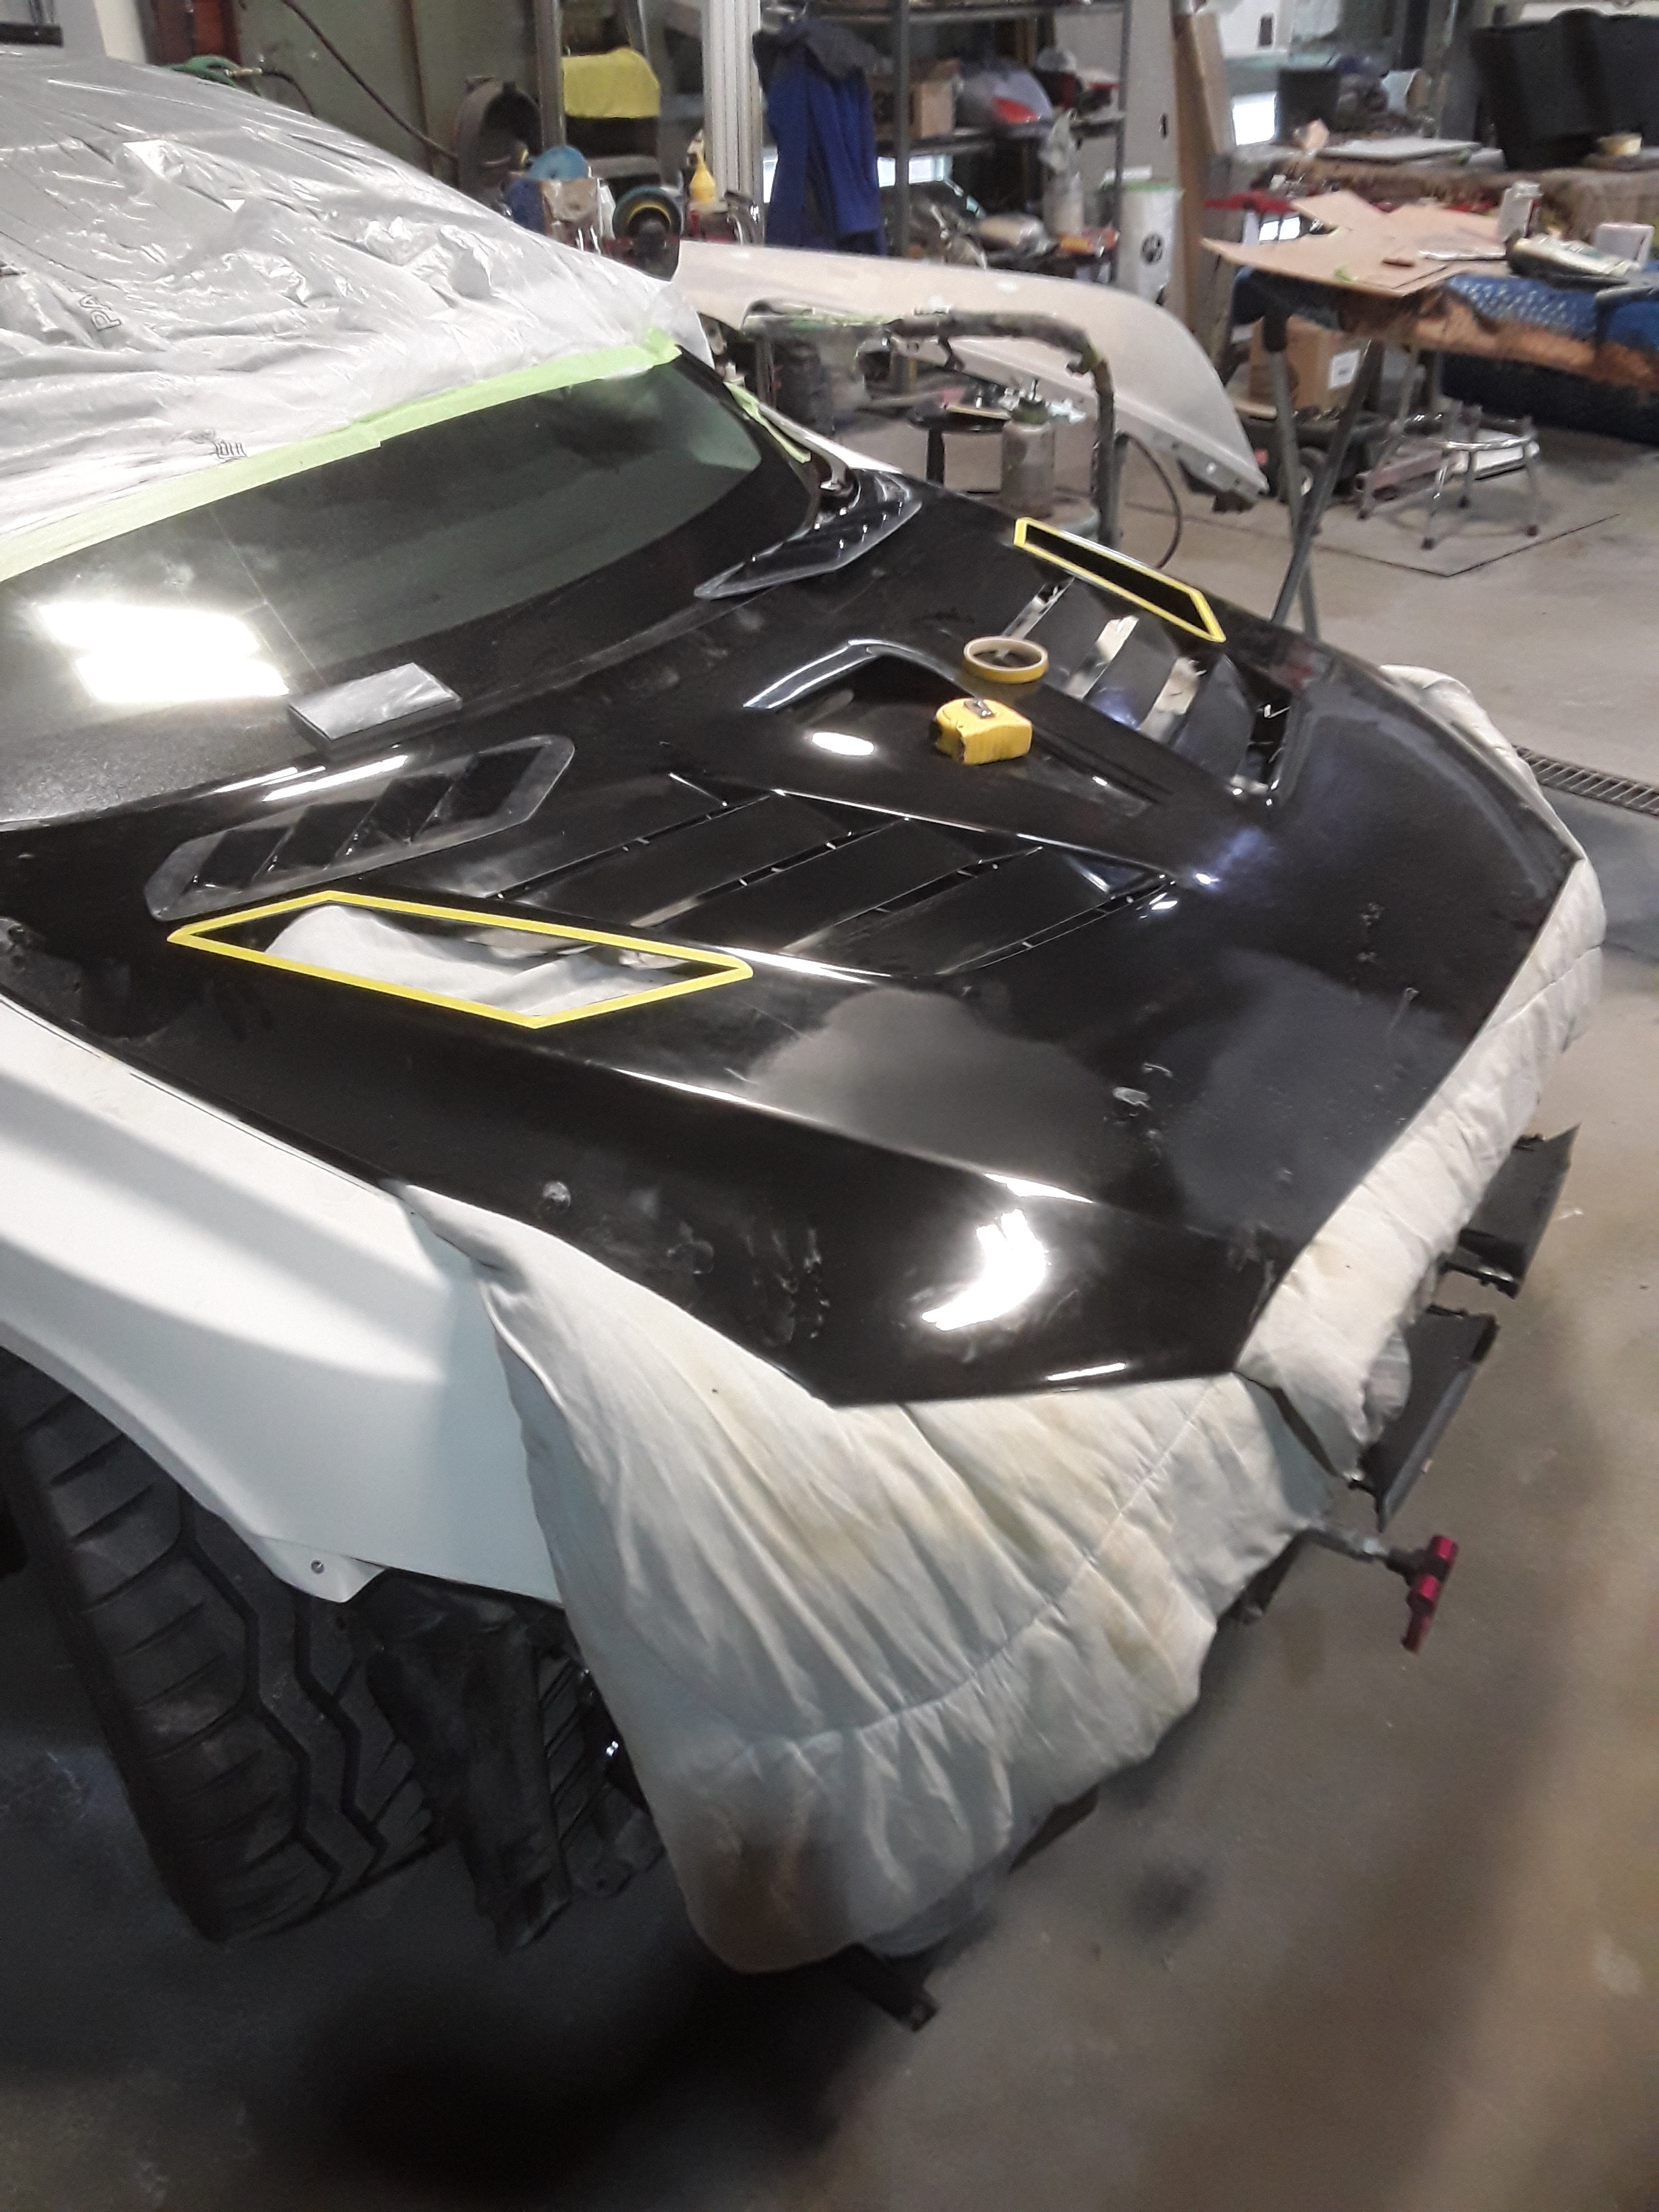 Evo X custom hood being prepped for grill installations